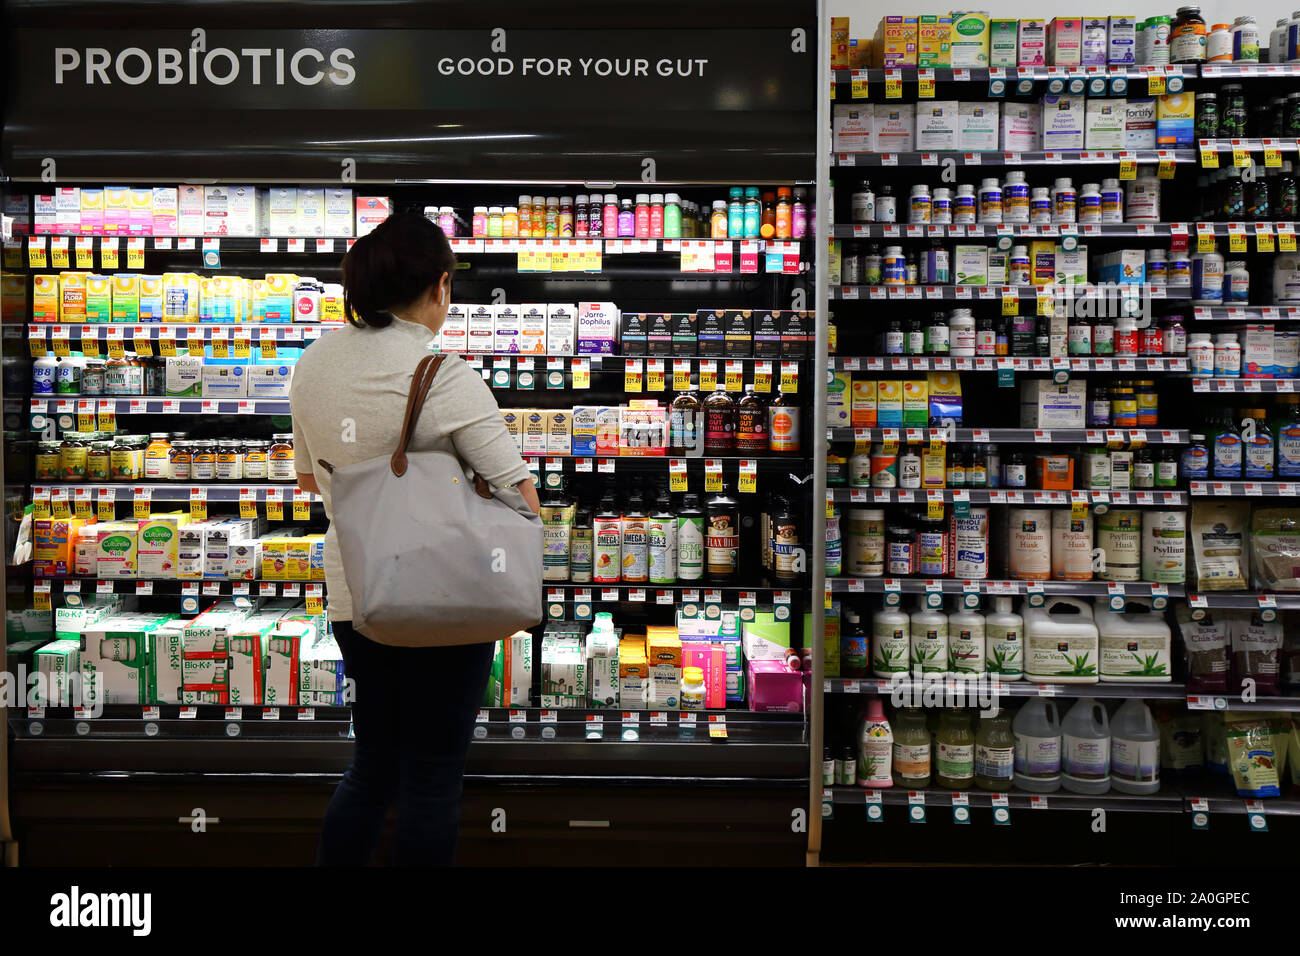 A woman browses the probiotics display case at a natural foods market Stock Photo